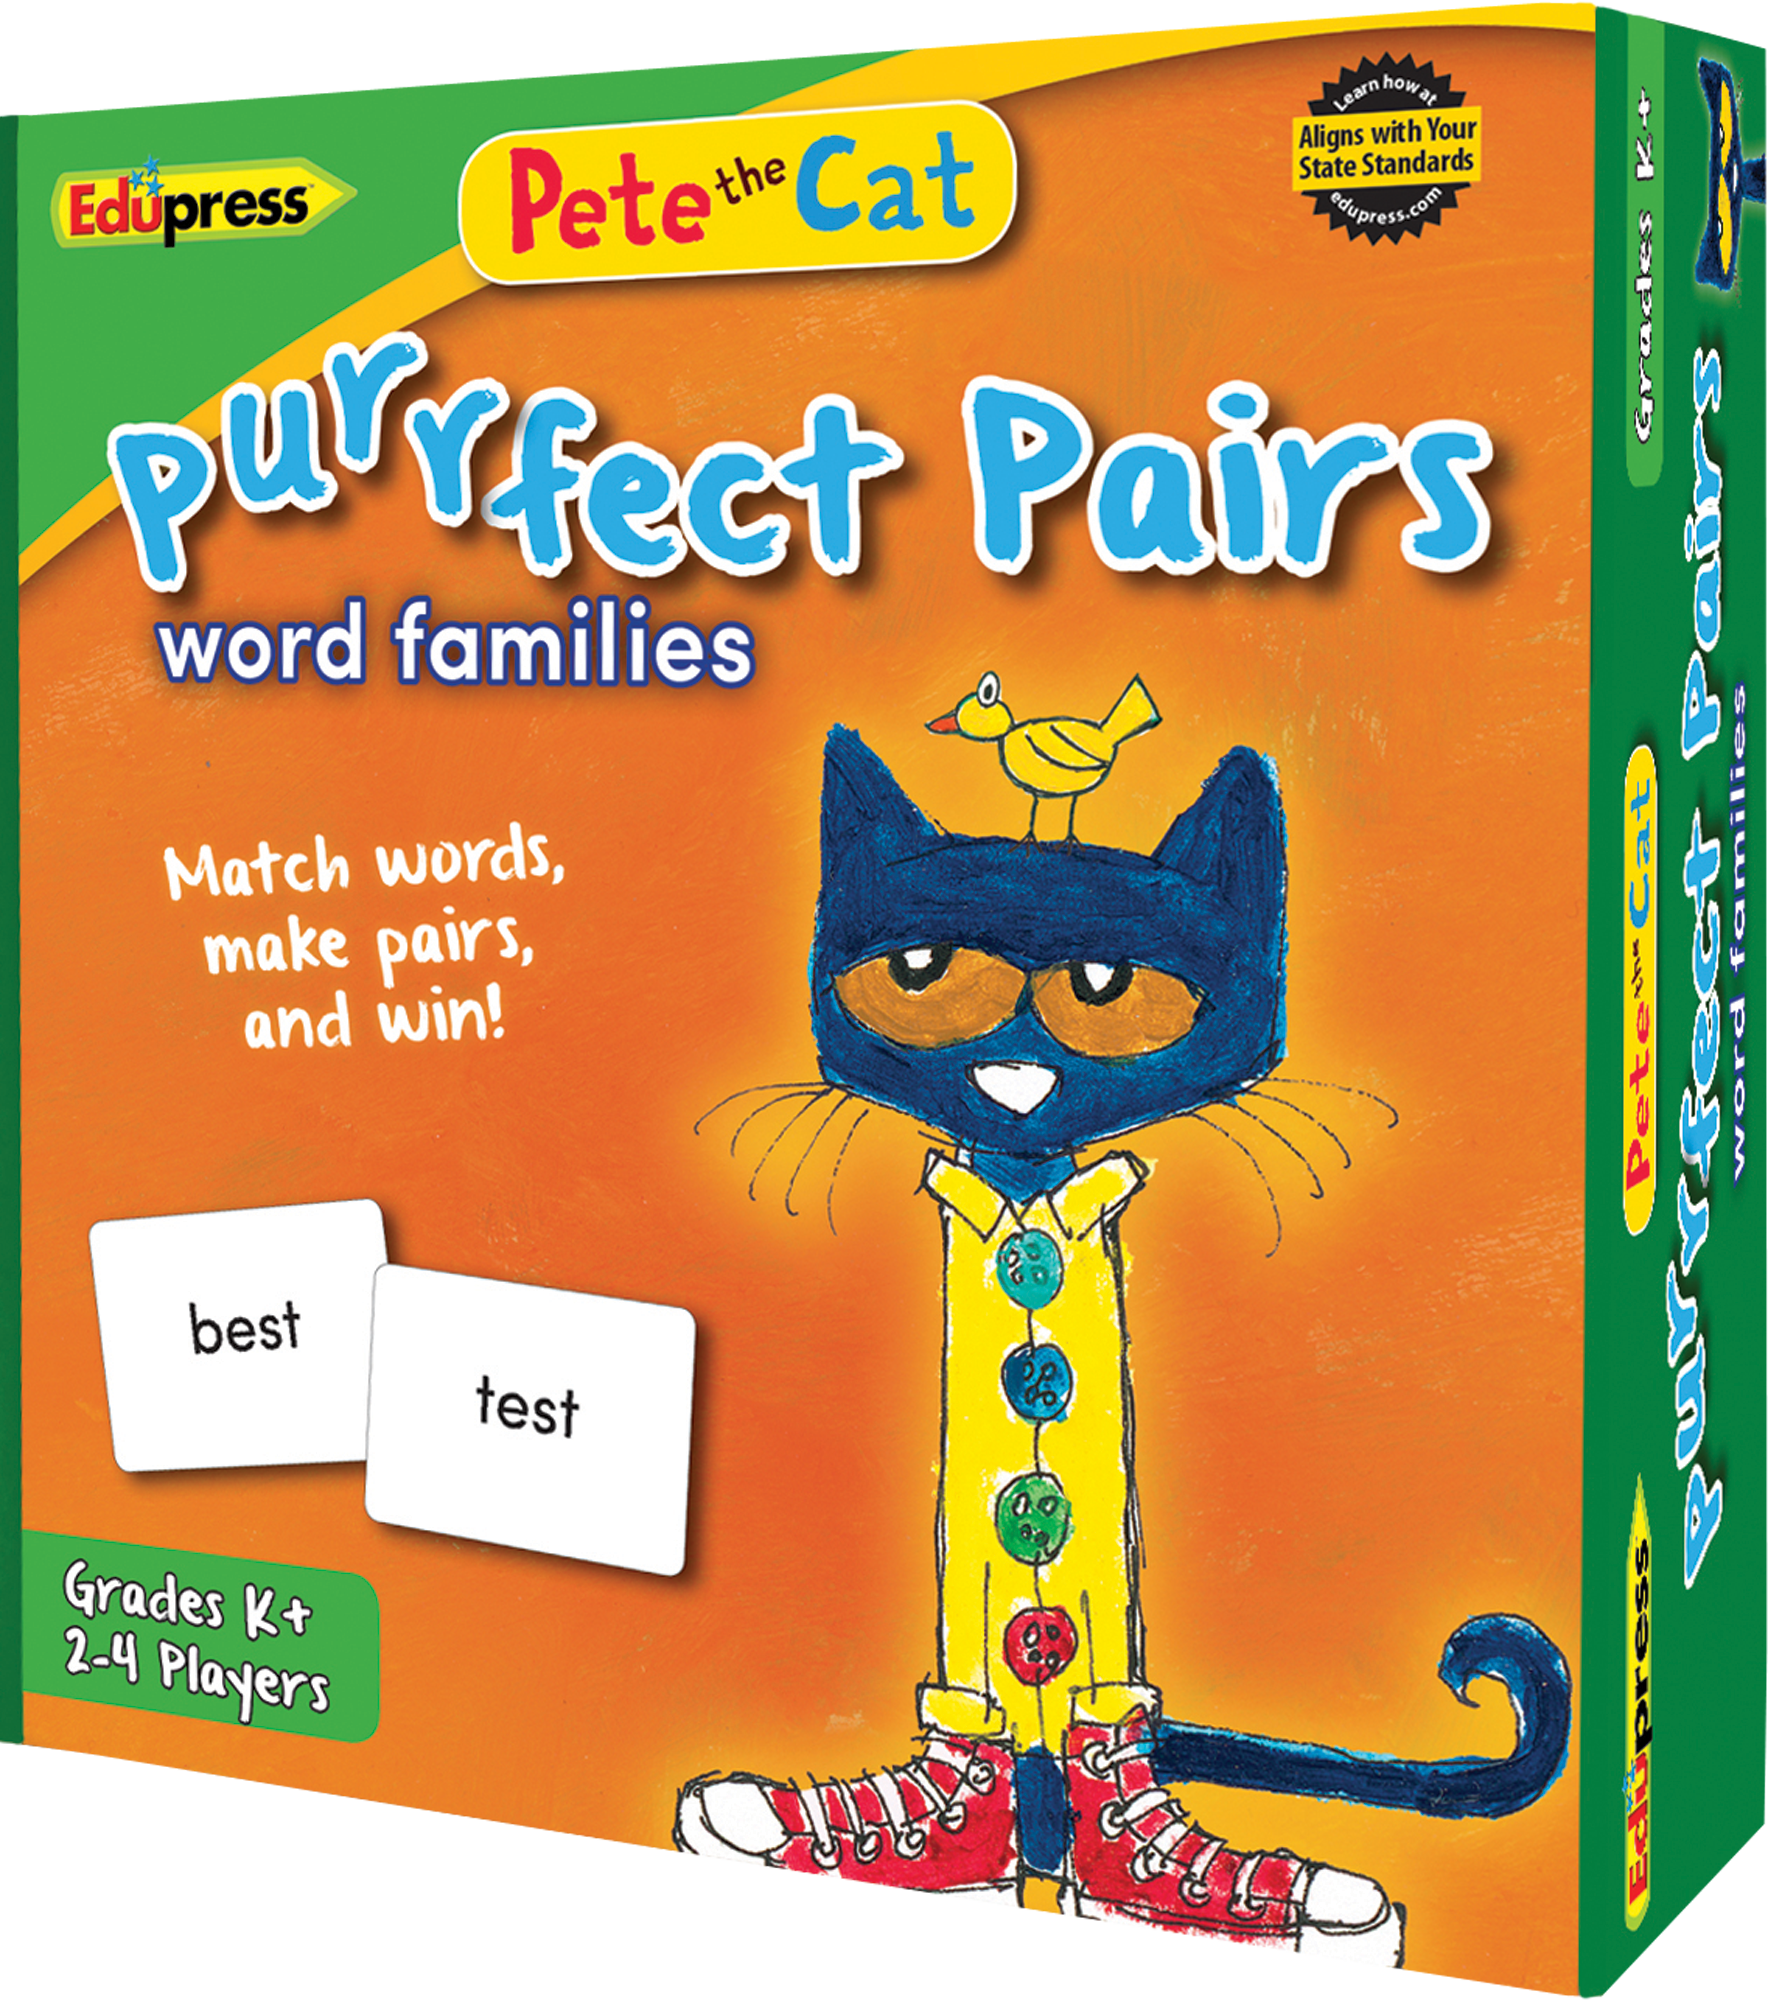 Pete the CatÂ® Purrfect Pairs Game: Word Families